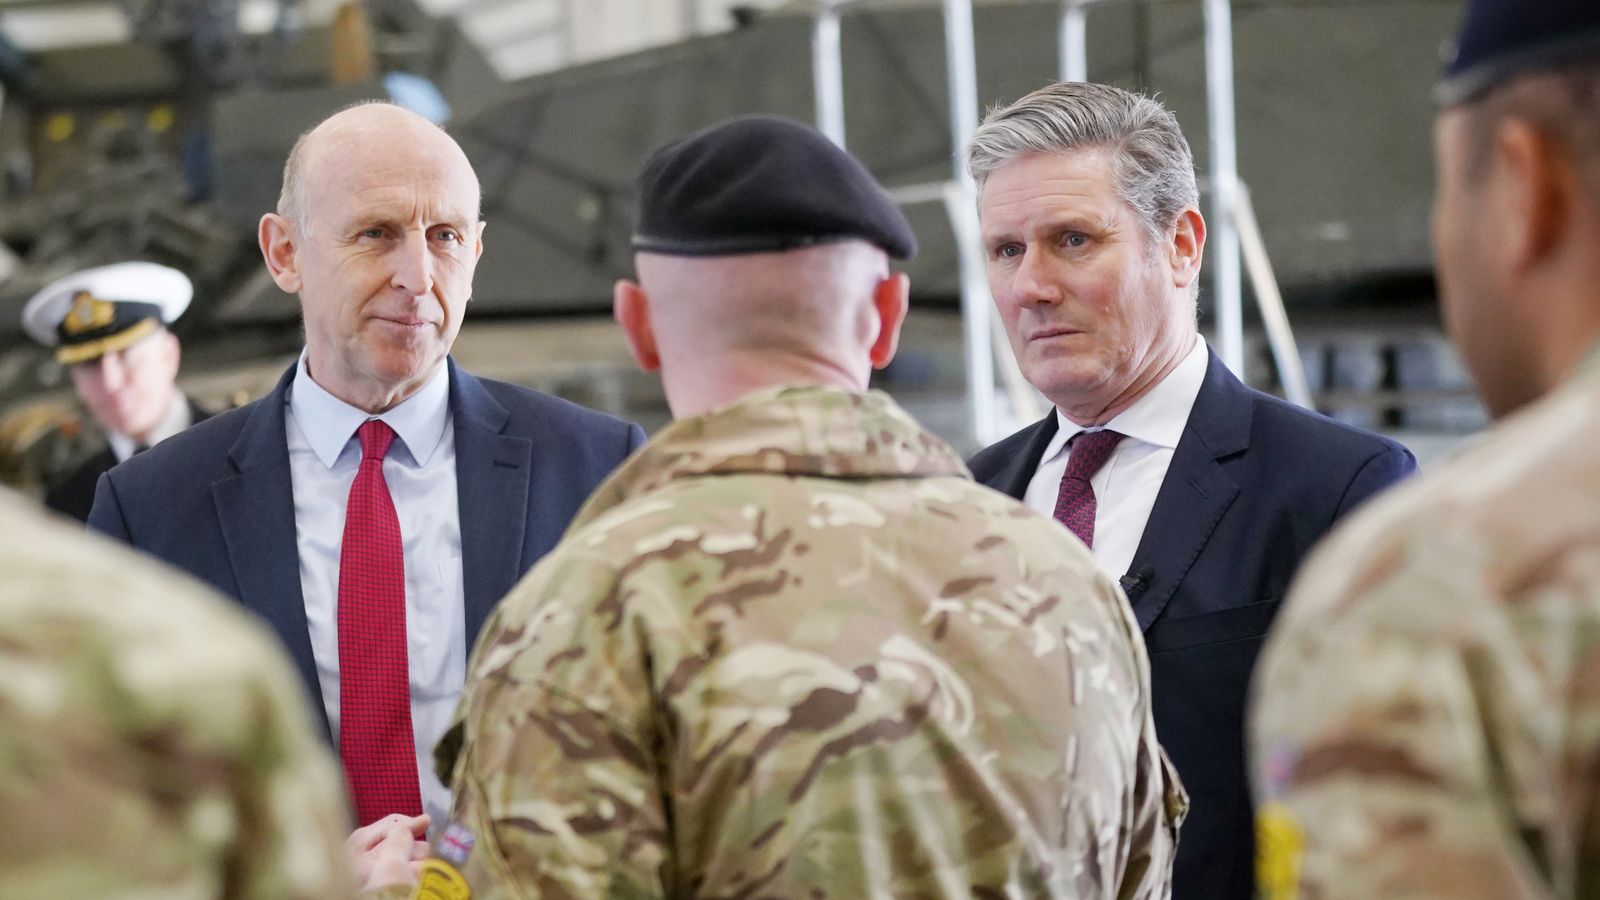 Sir Keir Starmer says national security 'comes first' as he makes pitch to Tory voters